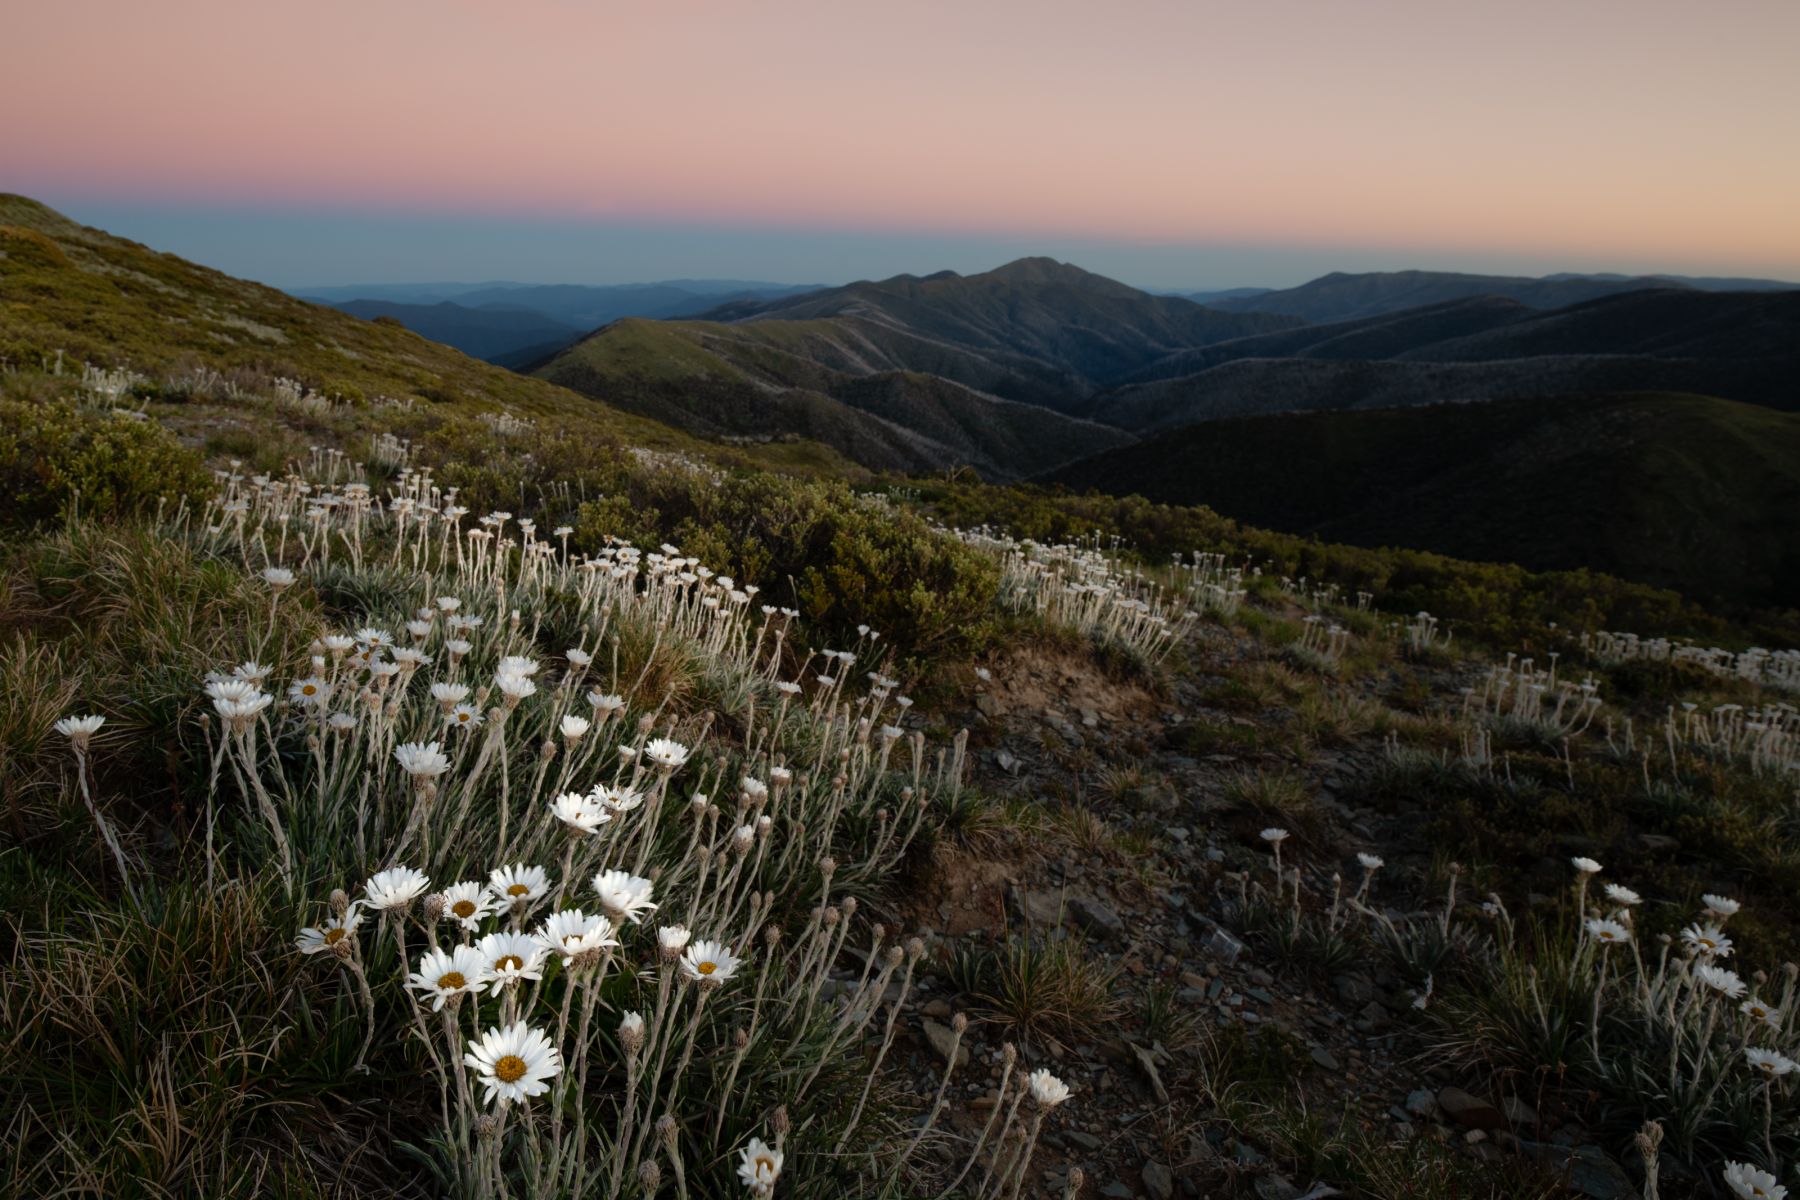 Wildflowers on Mount Hotham in the foreground and mountain views in the distance